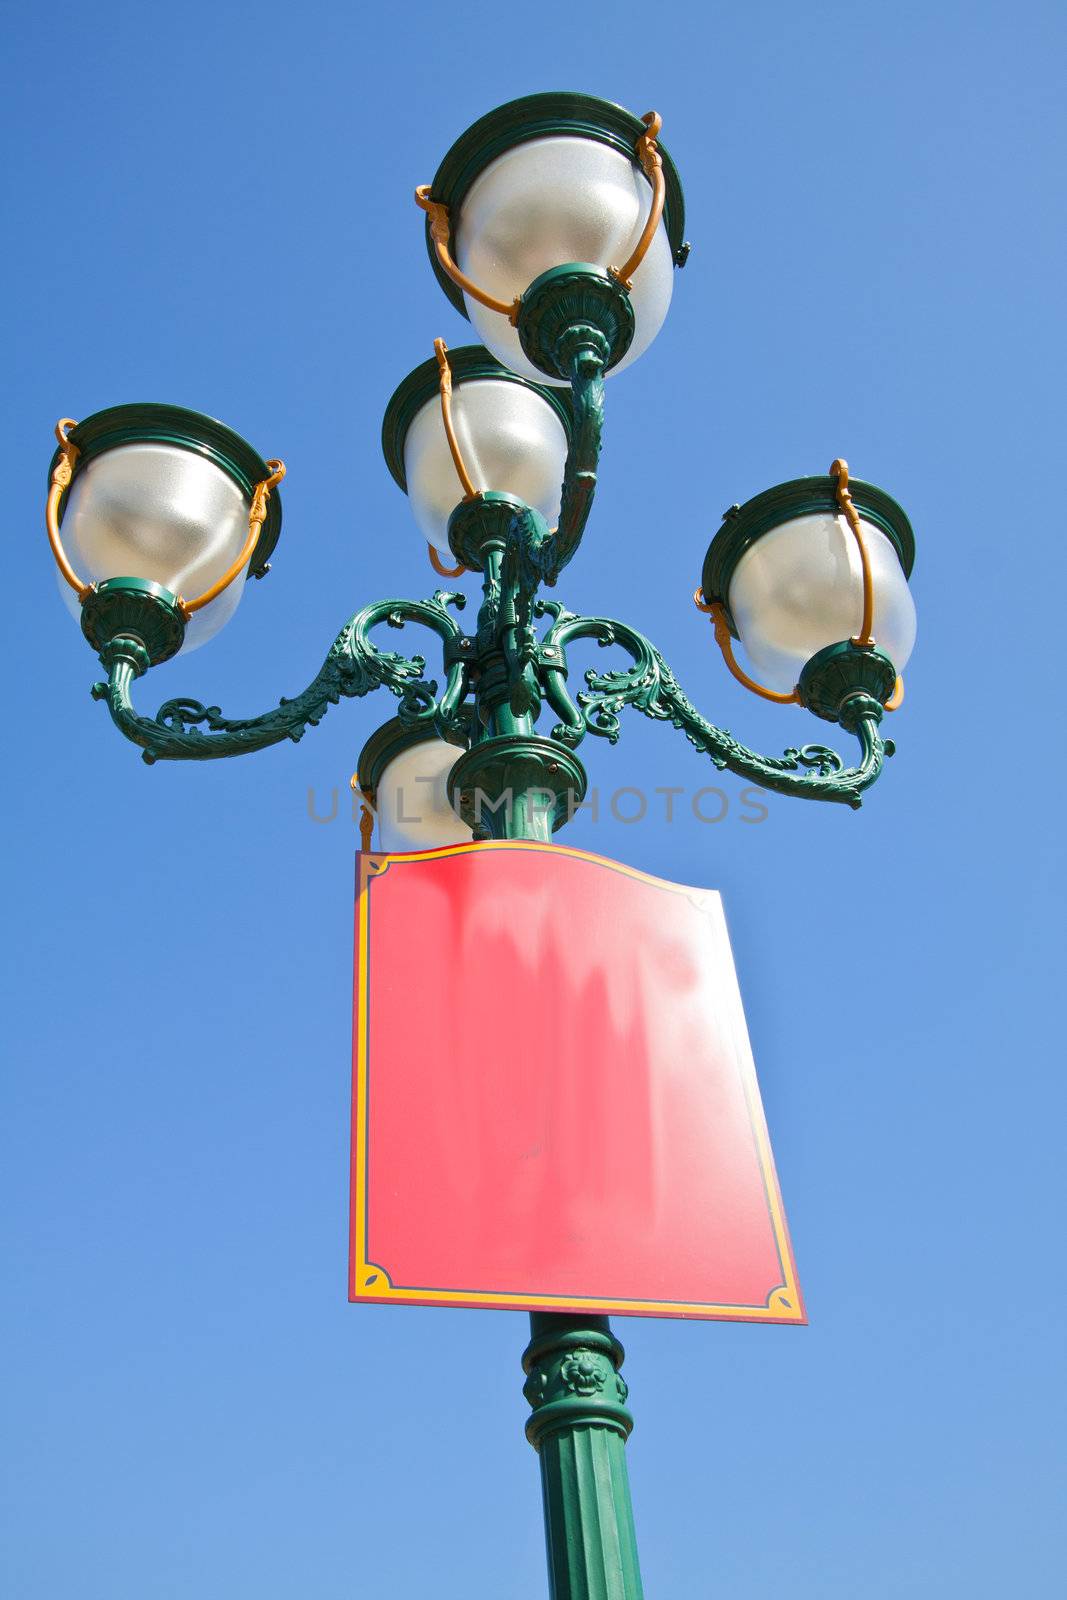 Green lamp under blue sky by kawing921